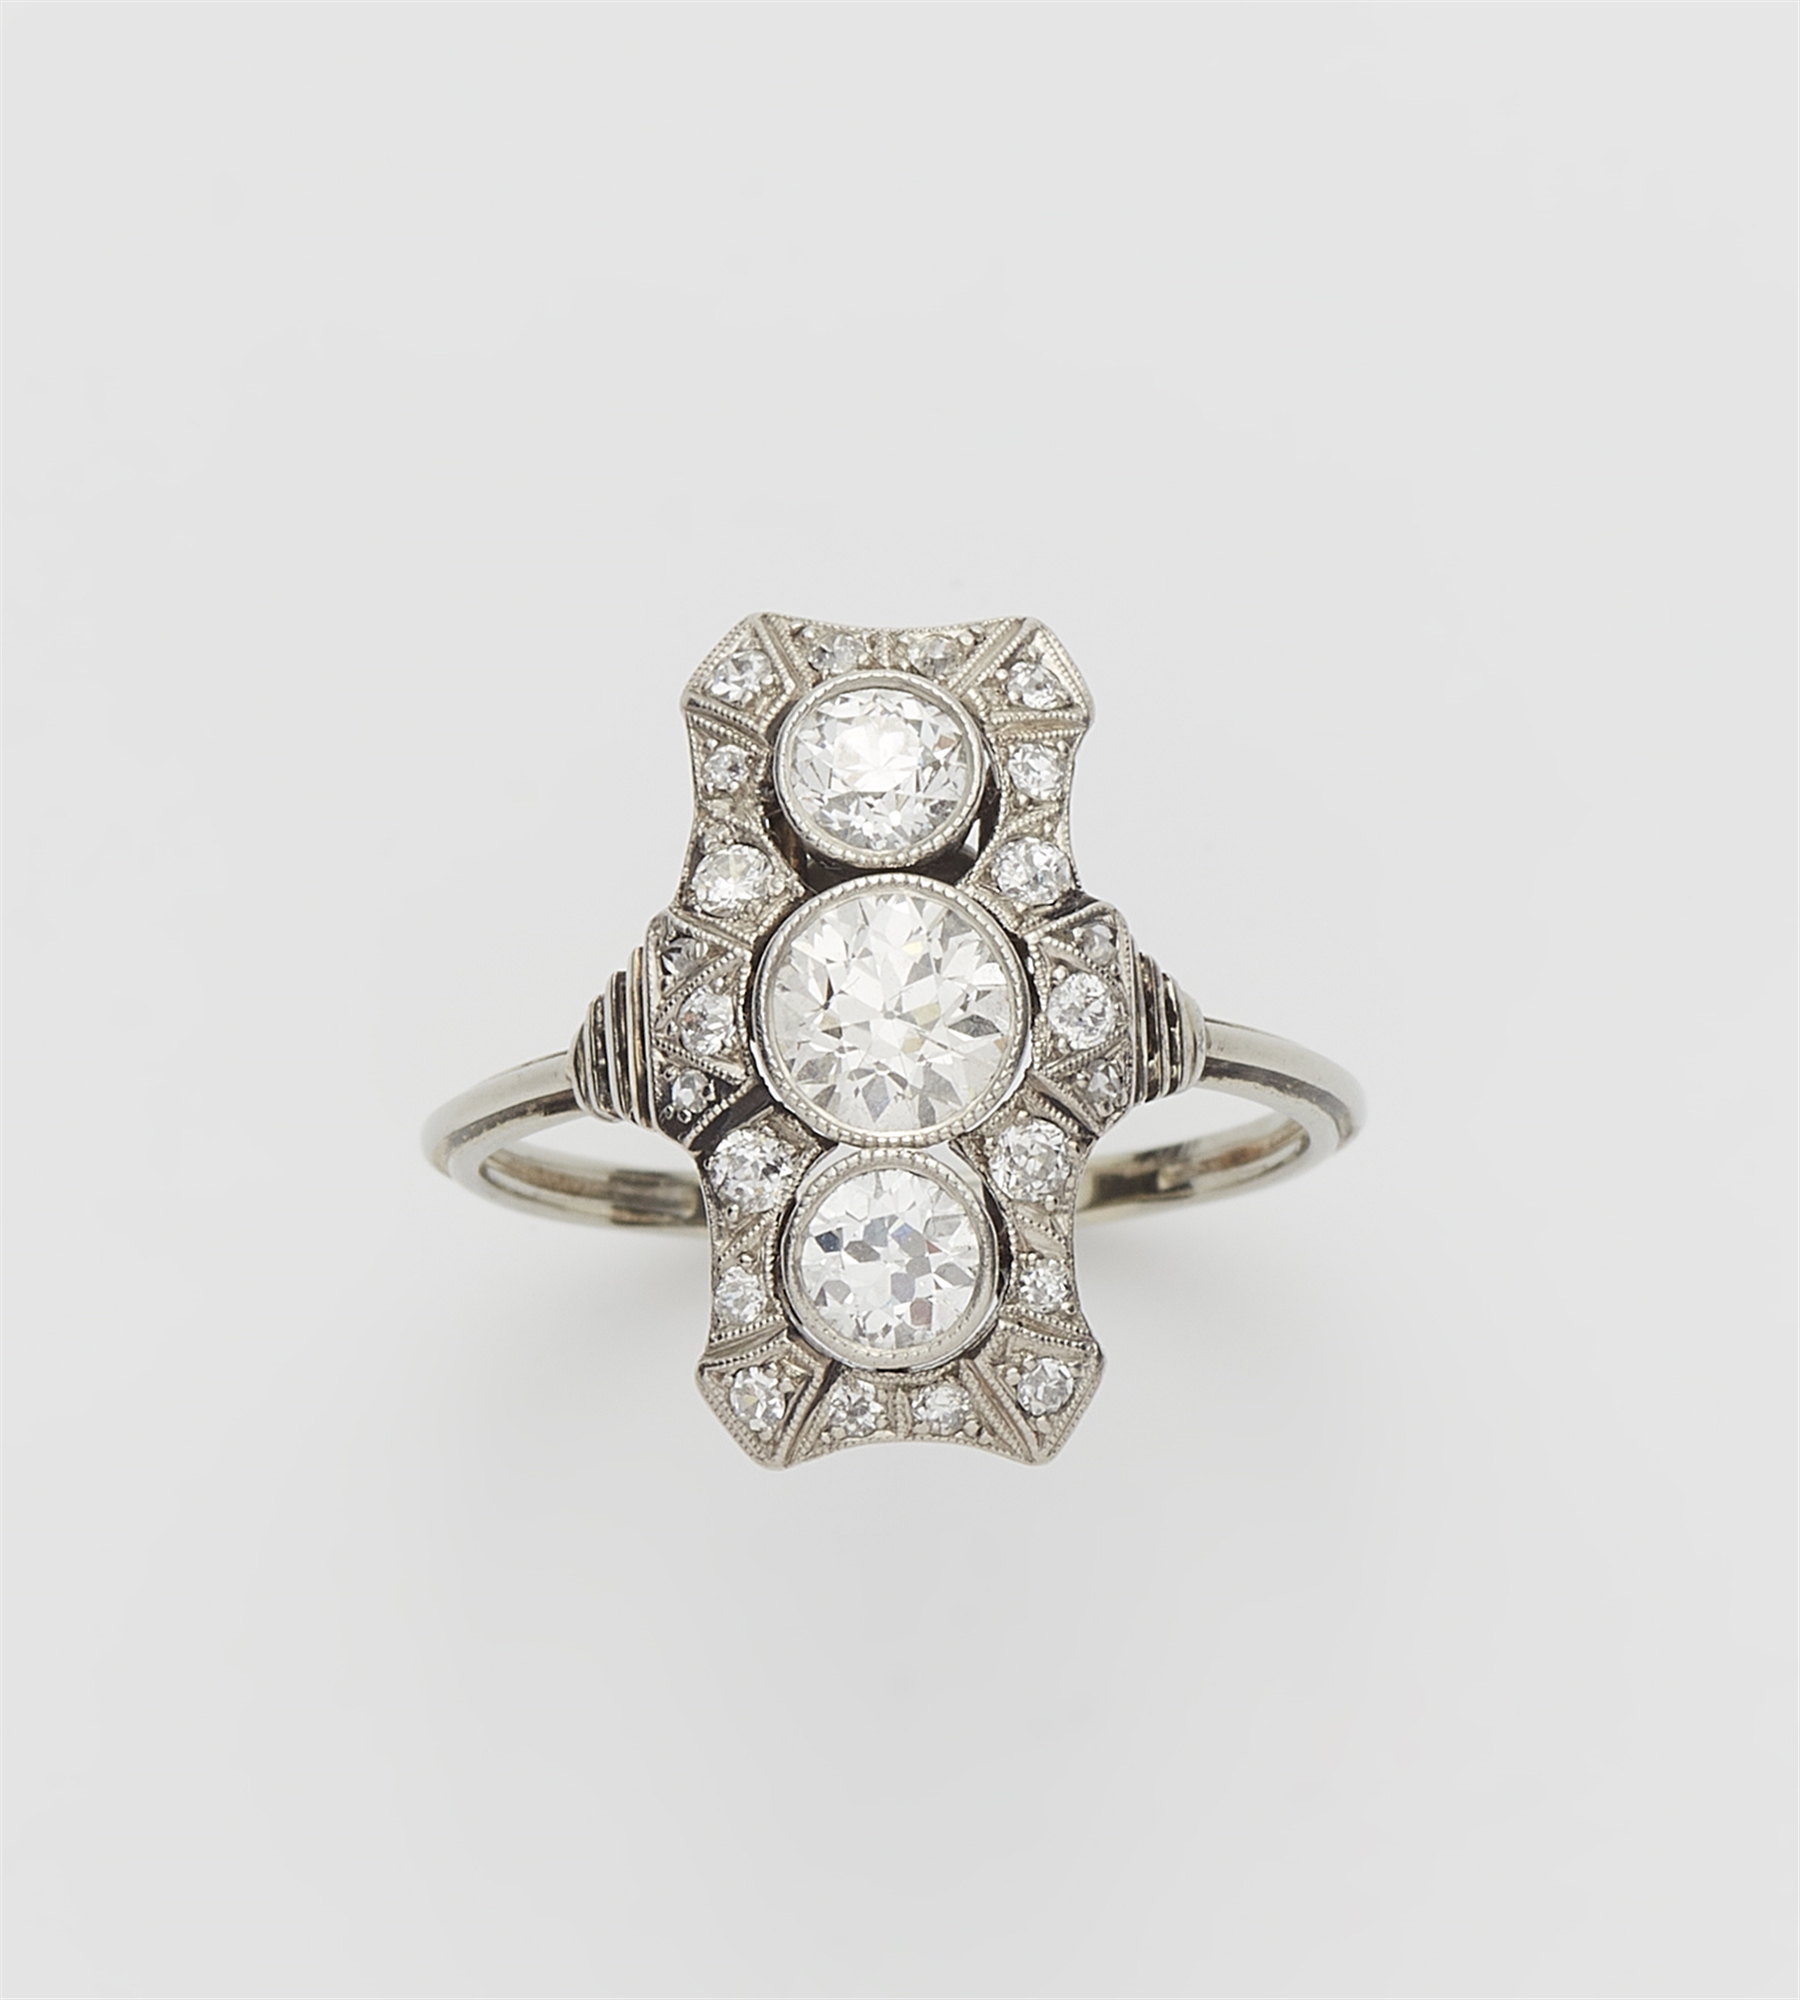 An Art Déco platinum 14k white gold and diamond ring.